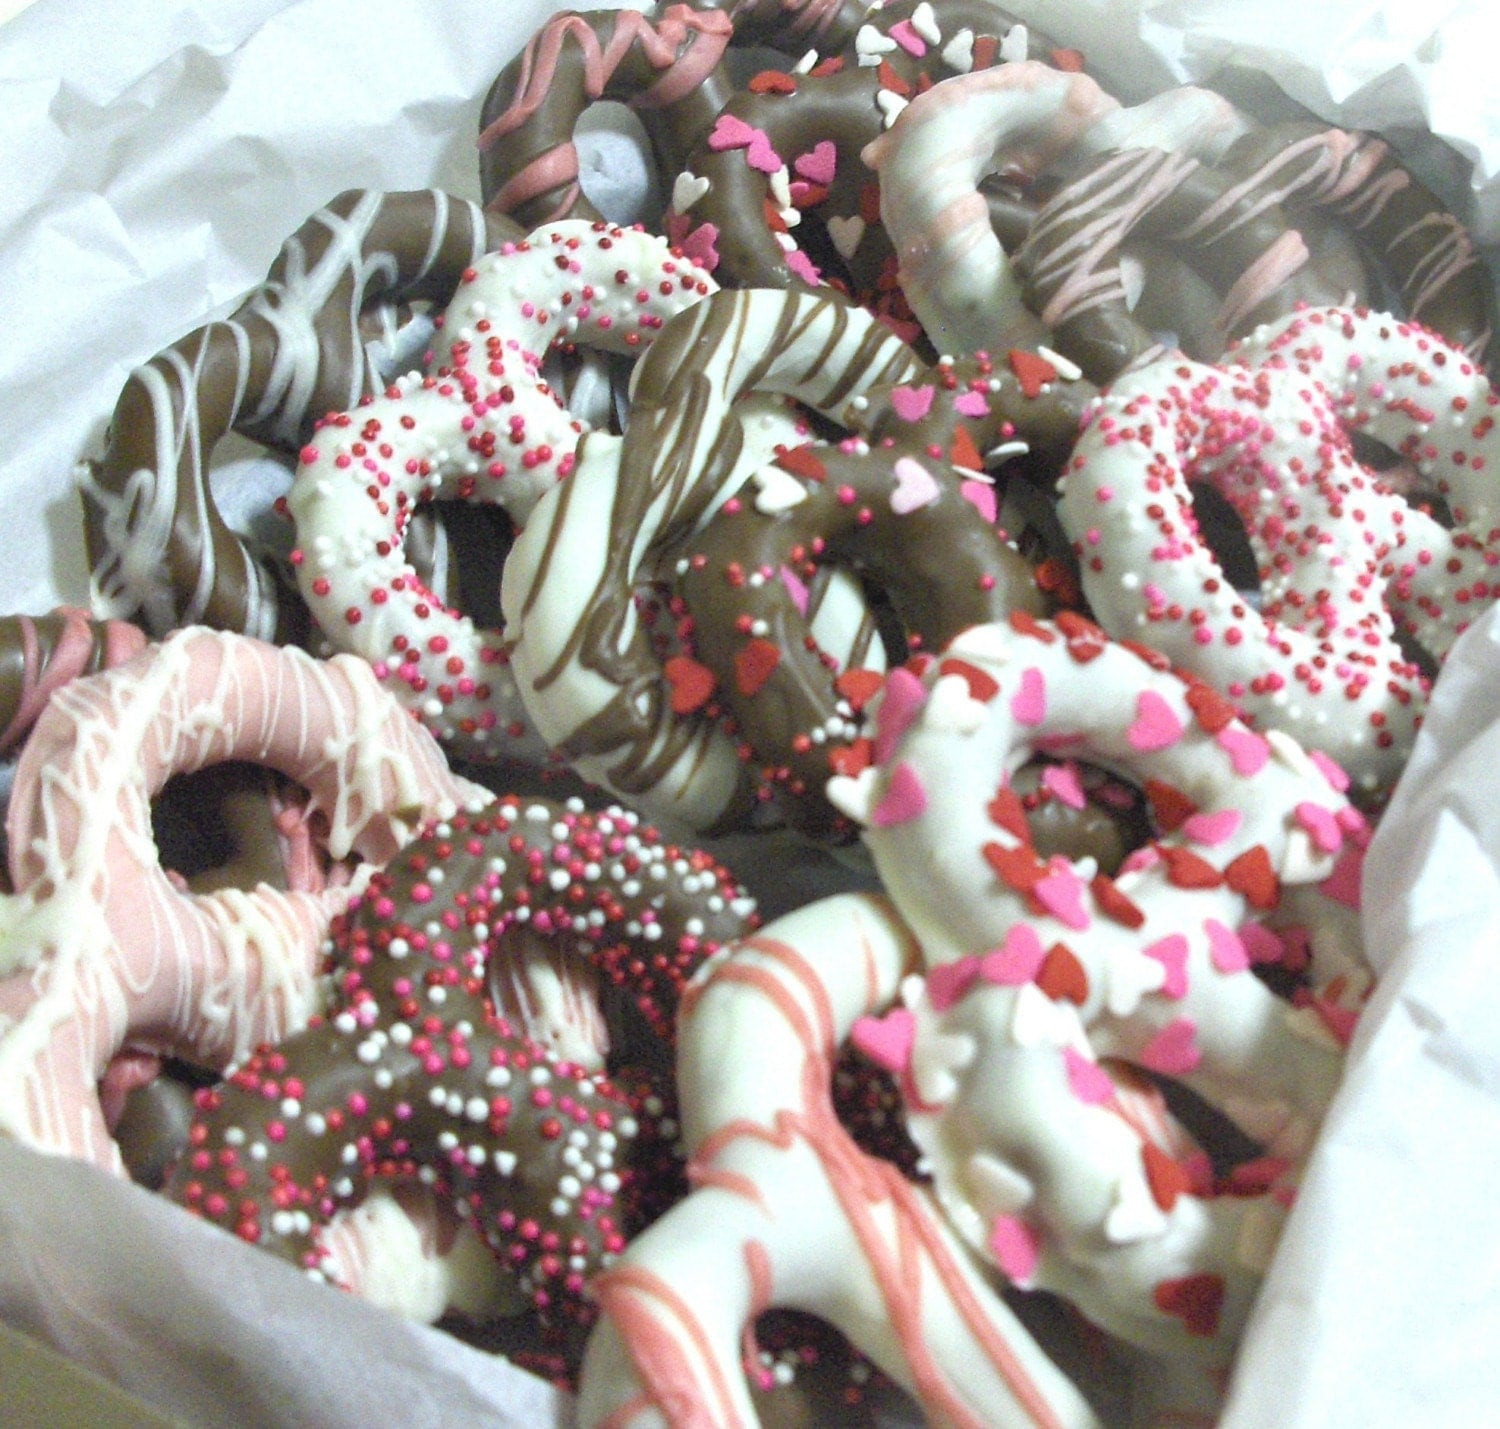 Chocolate Covered Pretzels For Valentine Day
 VALENTINE CANDY Chocolate covered pretzels Gourmet Treat